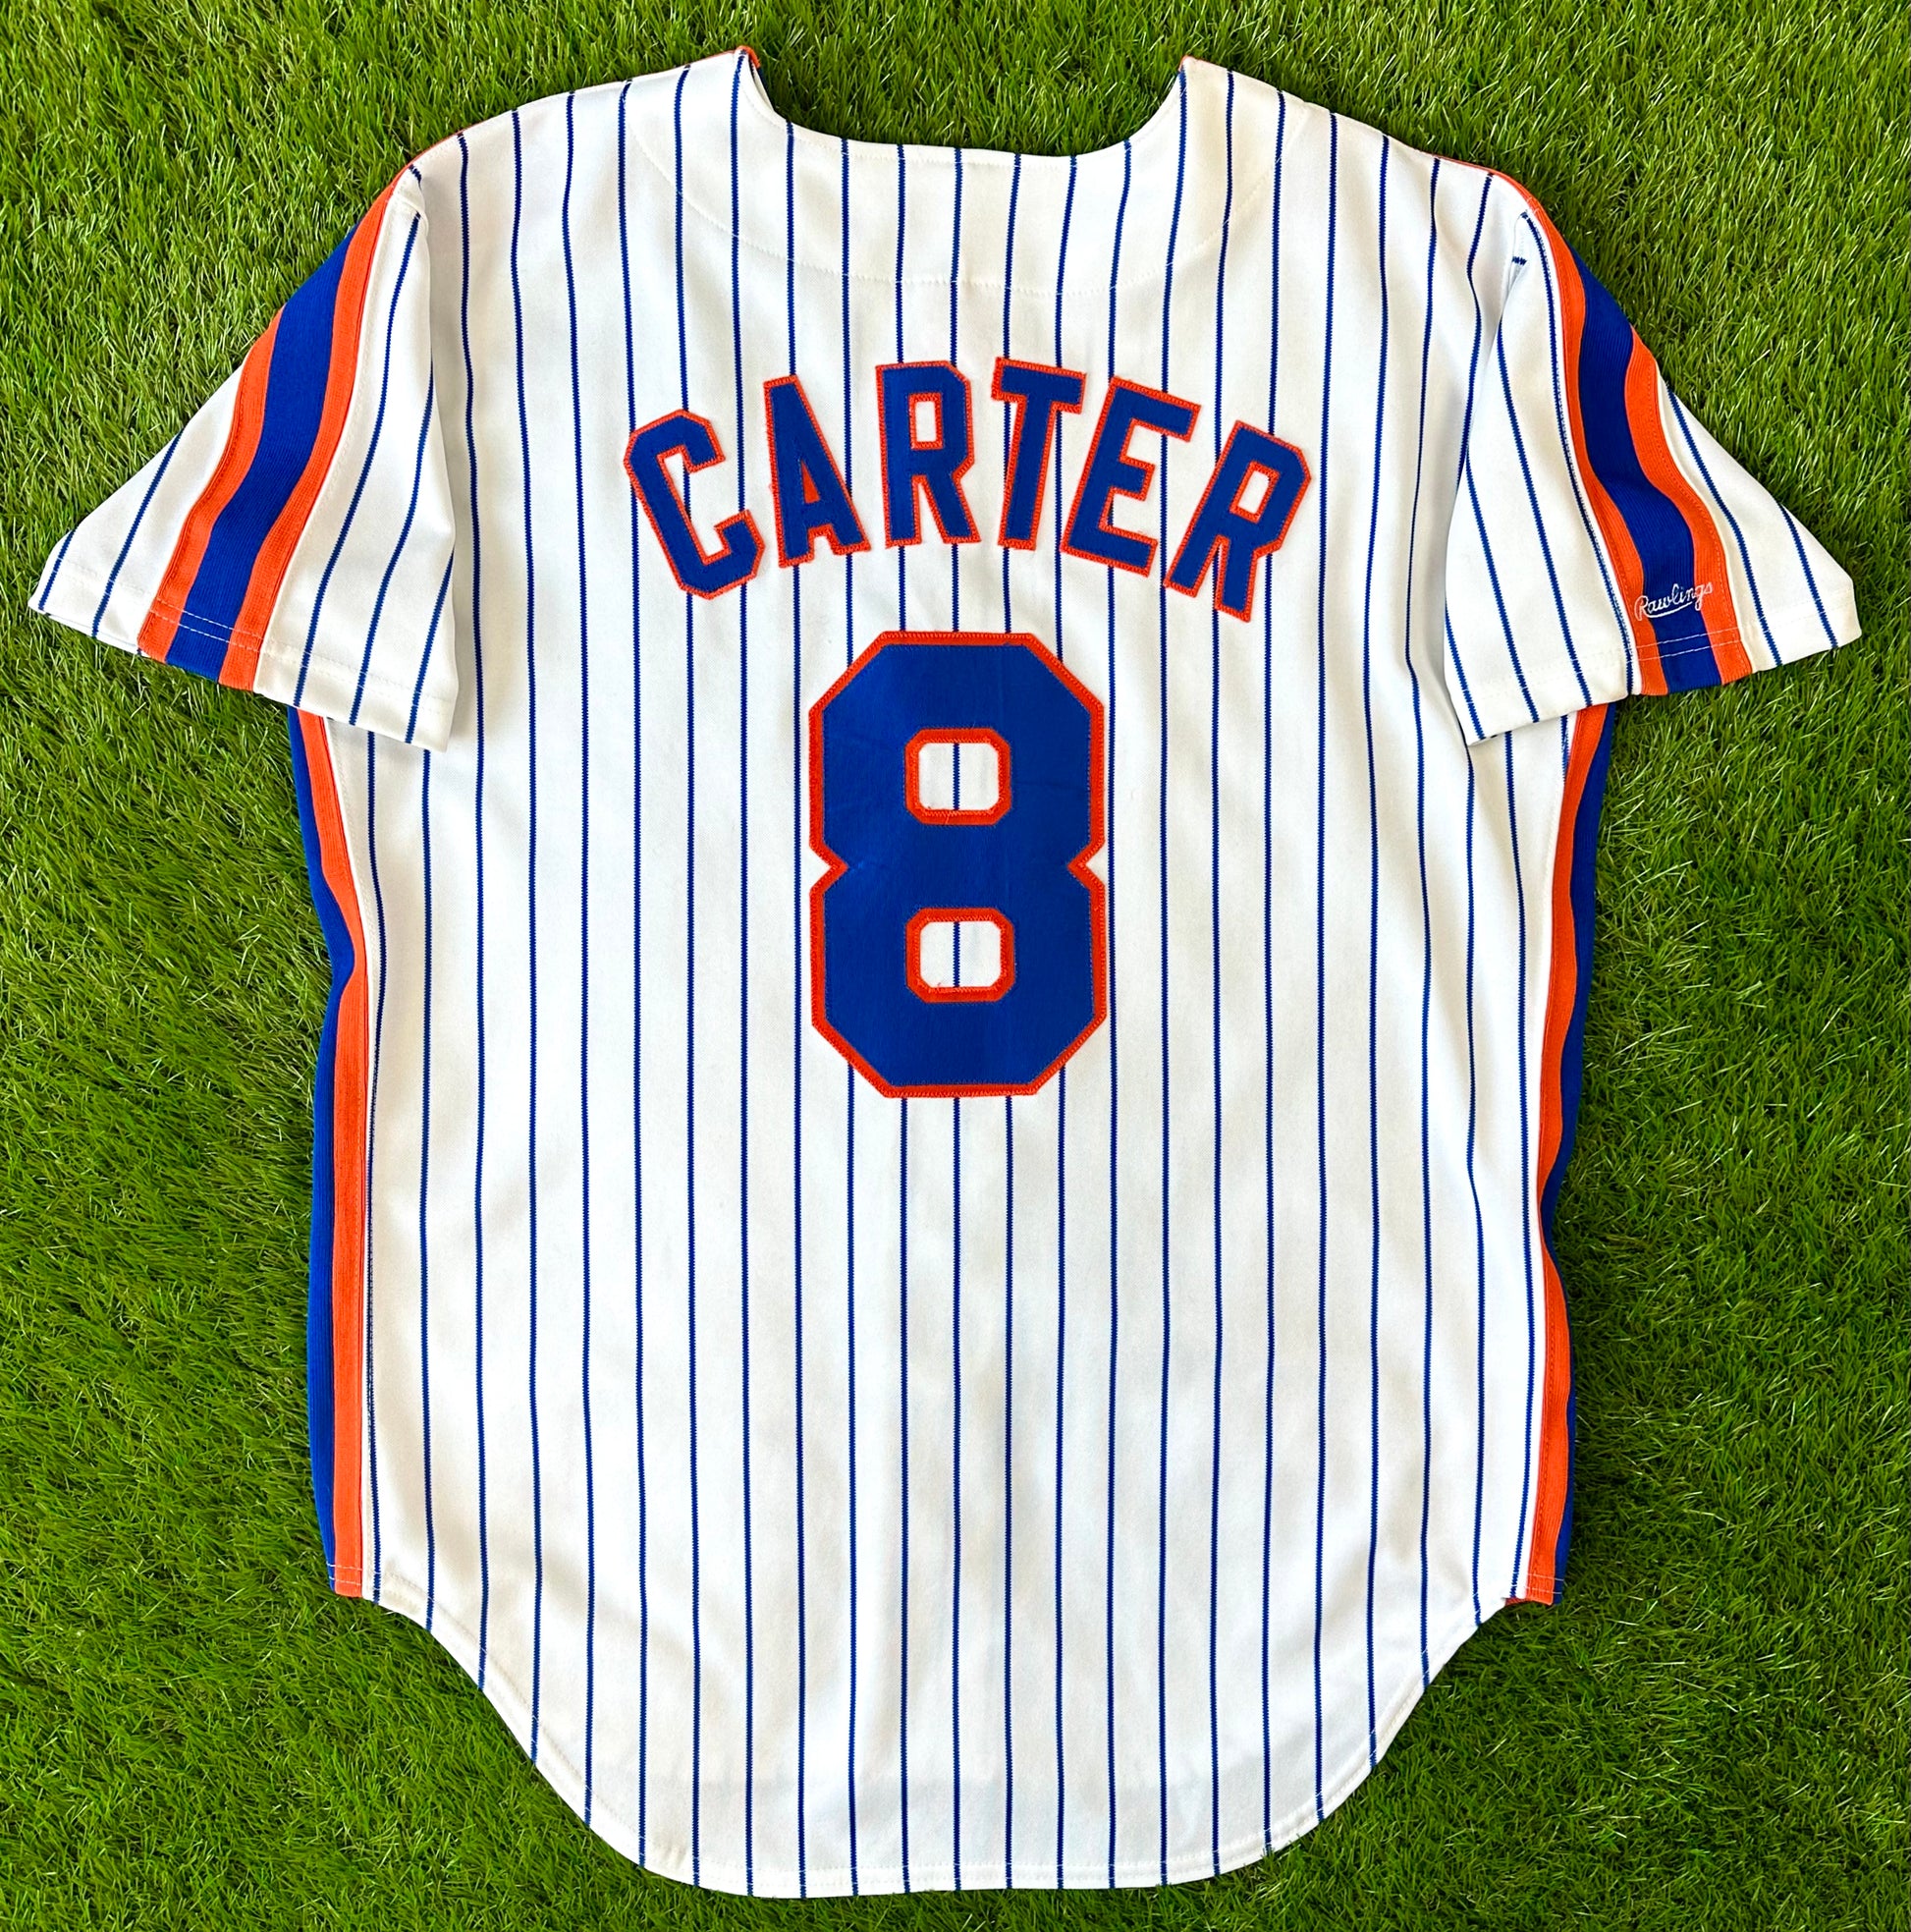 Authentic Gary Carter New York Mets Home 1986 Jersey - Shop